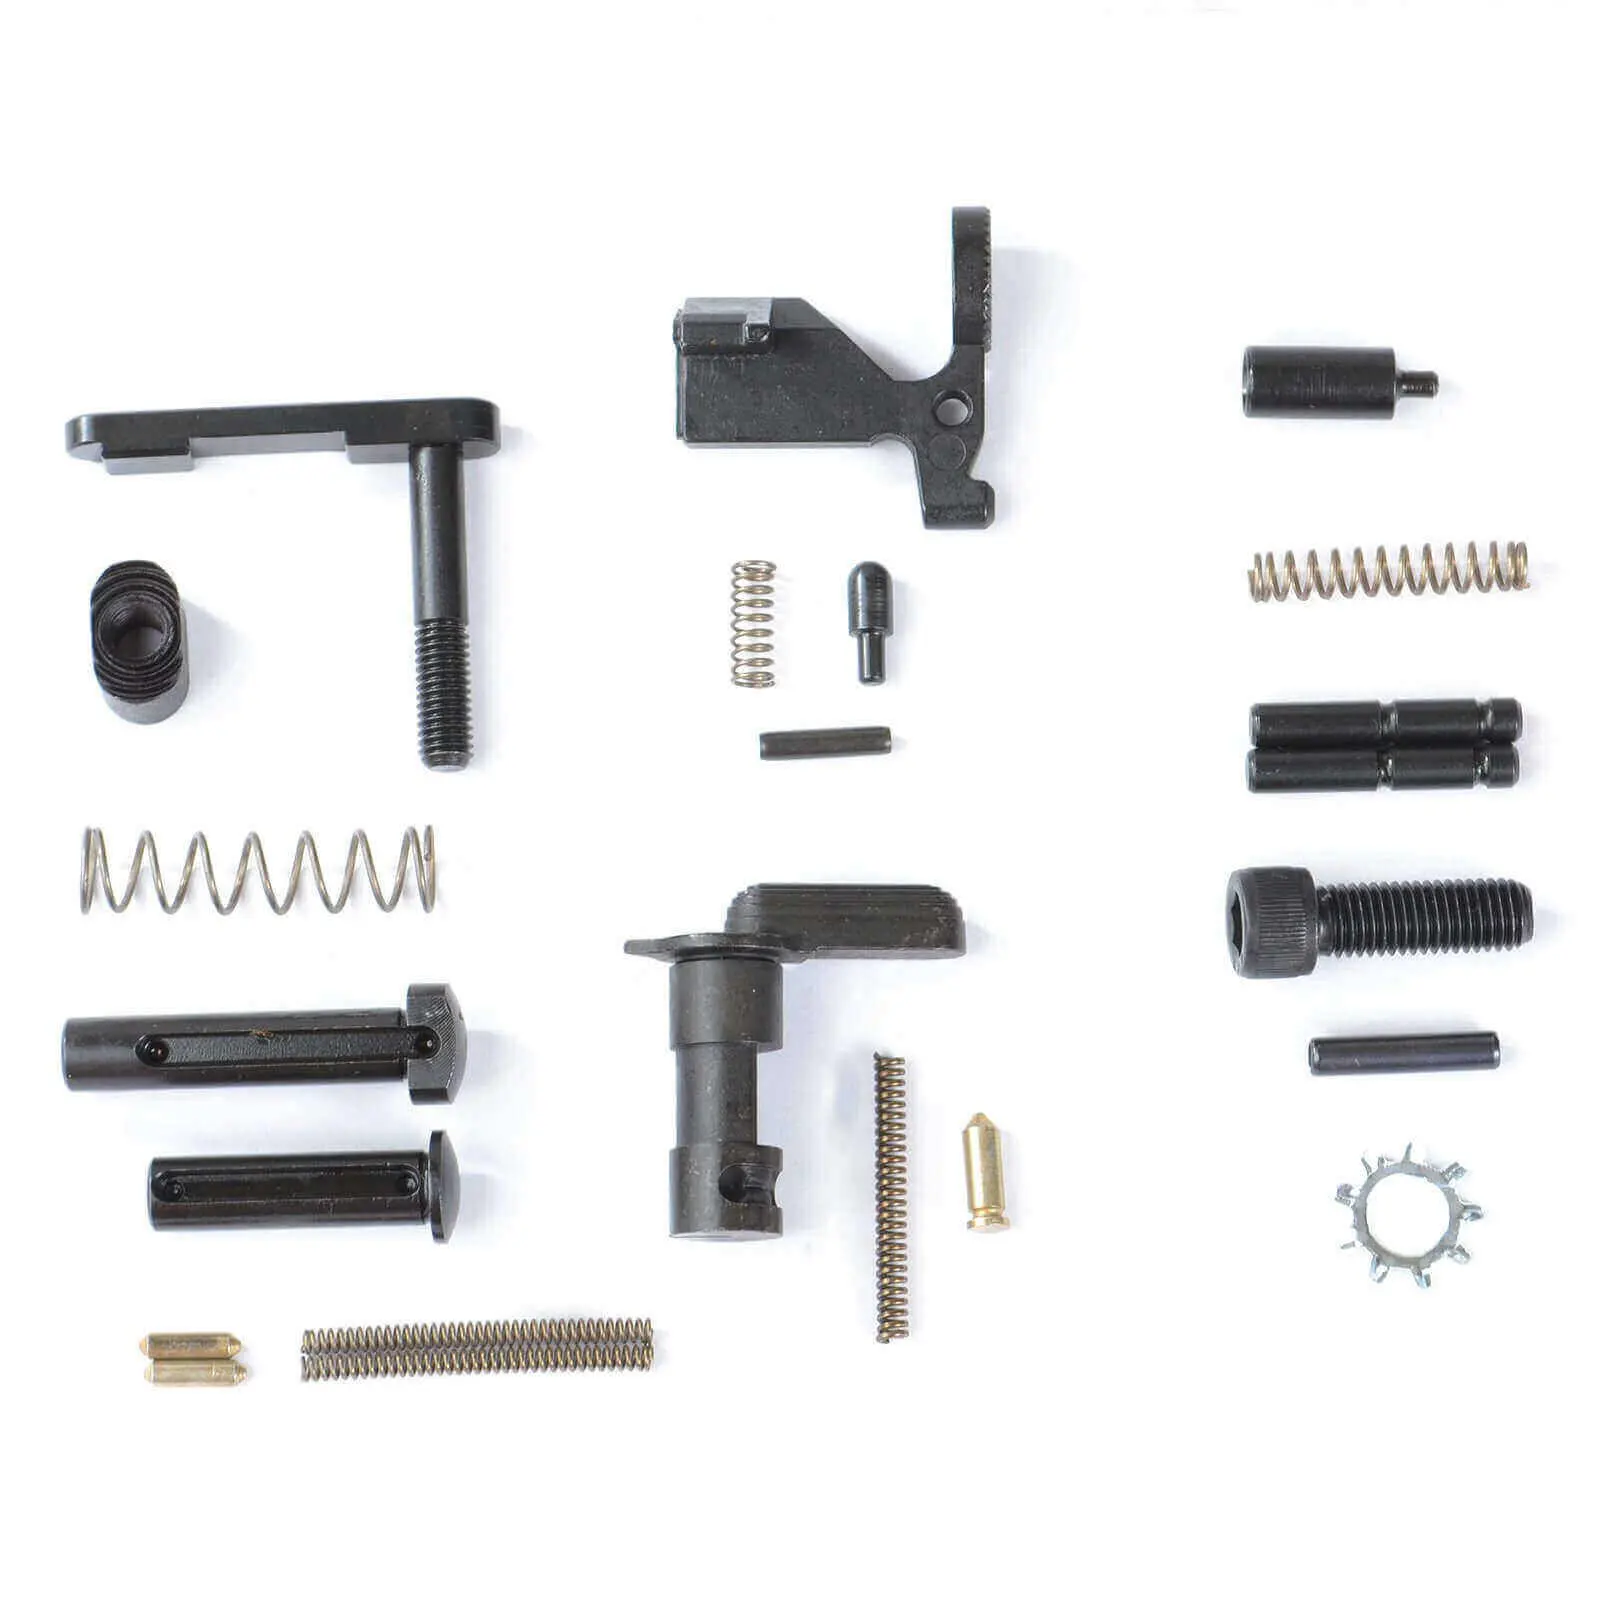 AT3™ 2-Stage Lower Parts Kit with 1005 Tactical Nickel Boron Trigger - No Grip or Trigger Guard